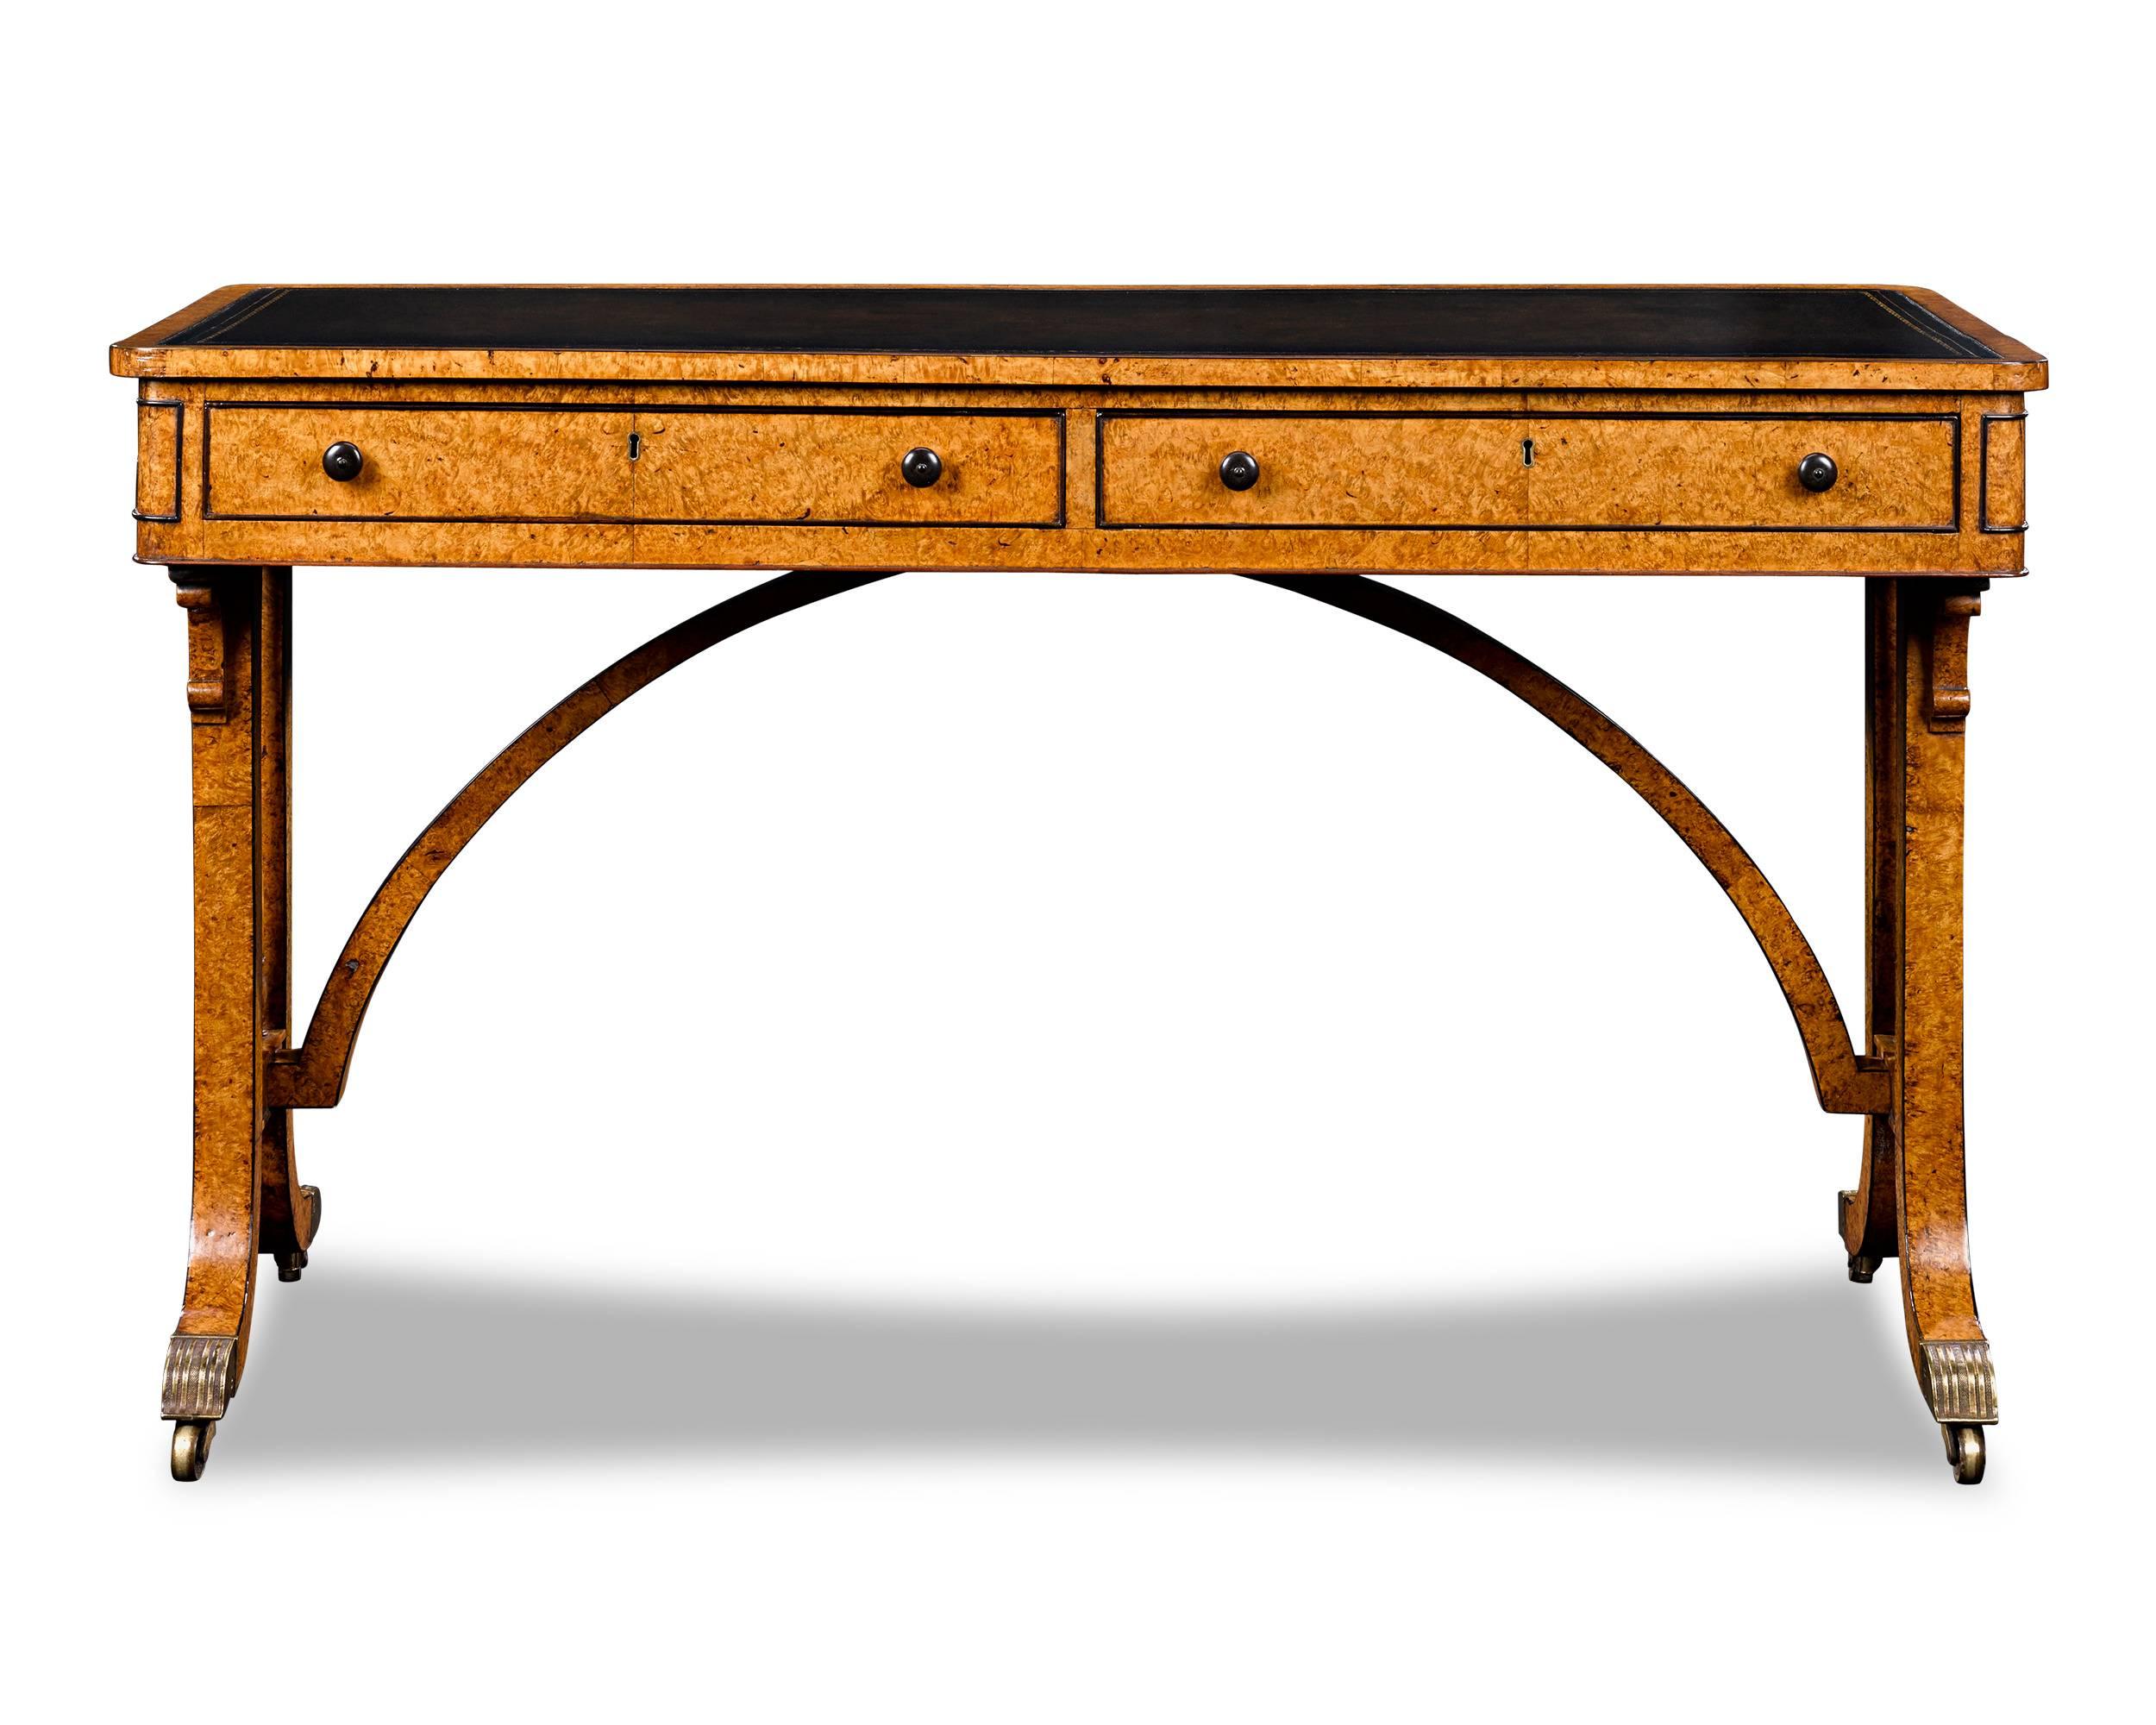 This outstanding English amboyna library table is an important example of the early Regency style design. The Regency era is considered by many to be the Zenith of English cabinet making, and this table is certainly exemplary of early 19th-century